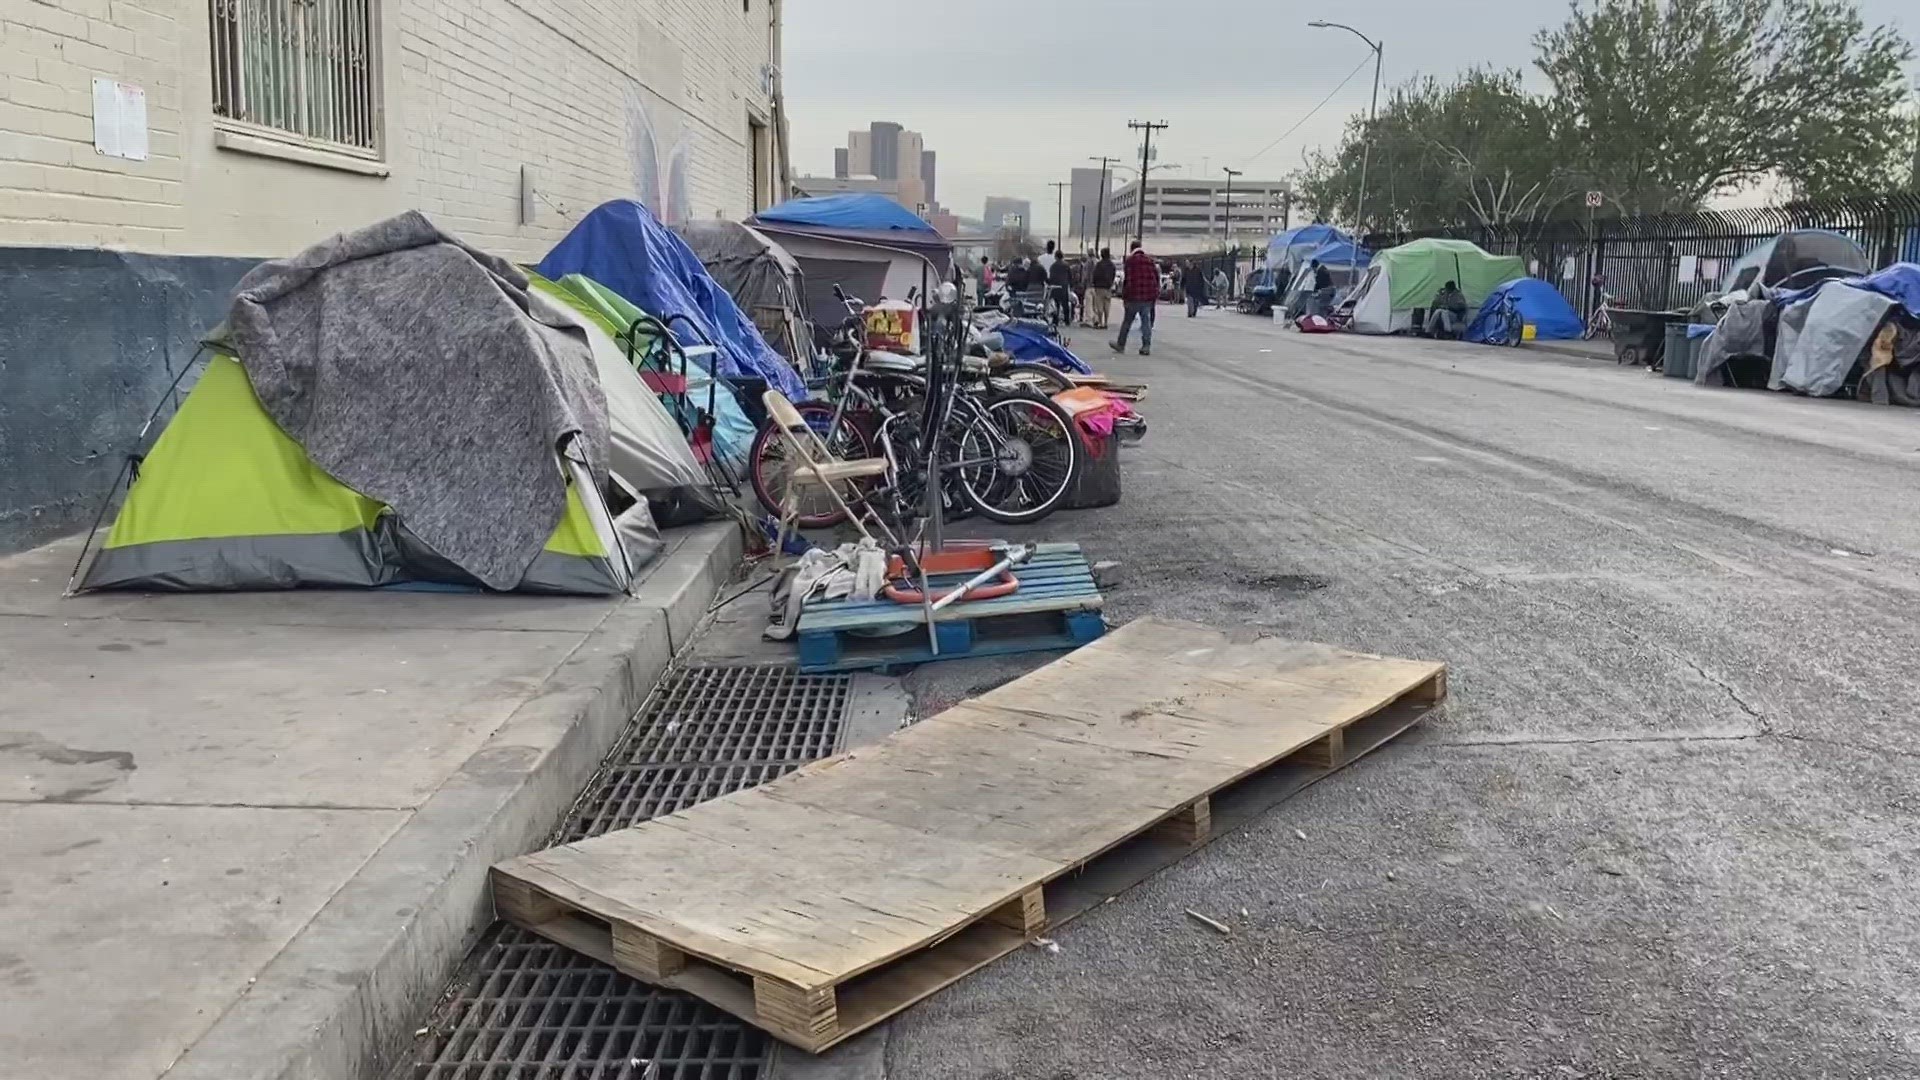 A judge has ruled in favor of the downtown residents and business owners who filed a lawsuit against the city for not addressing the large homeless encampment.